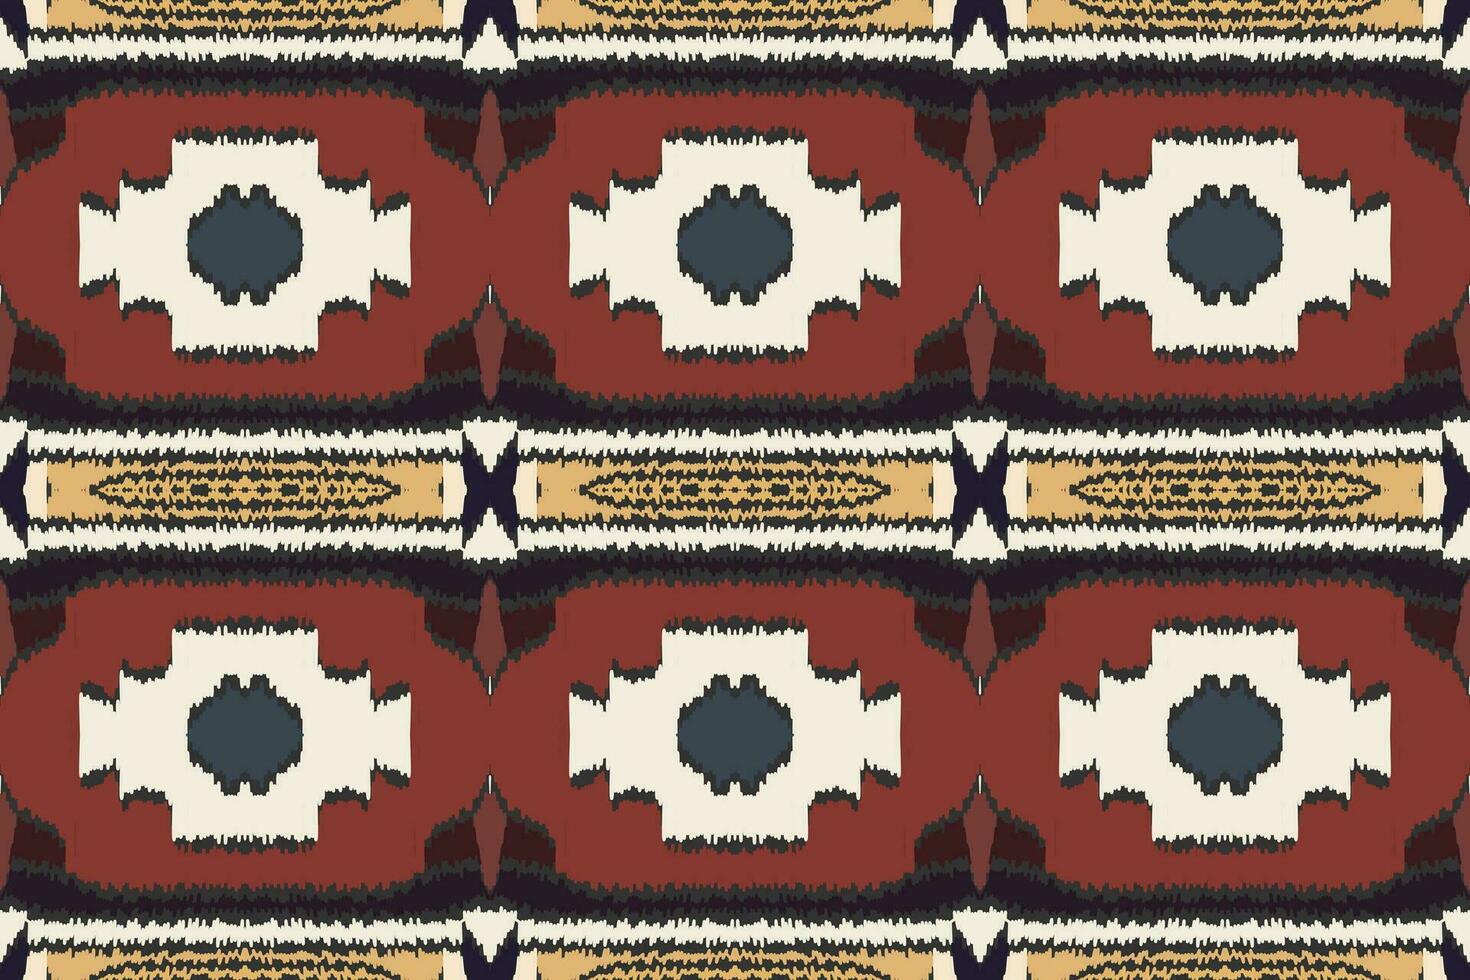 Motif Ikat Seamless Pattern Embroidery Background. Ikat Floral Geometric Ethnic Oriental Pattern Traditional. Ikat Aztec Style Abstract Design for Print Texture,fabric,saree,sari,carpet. vector